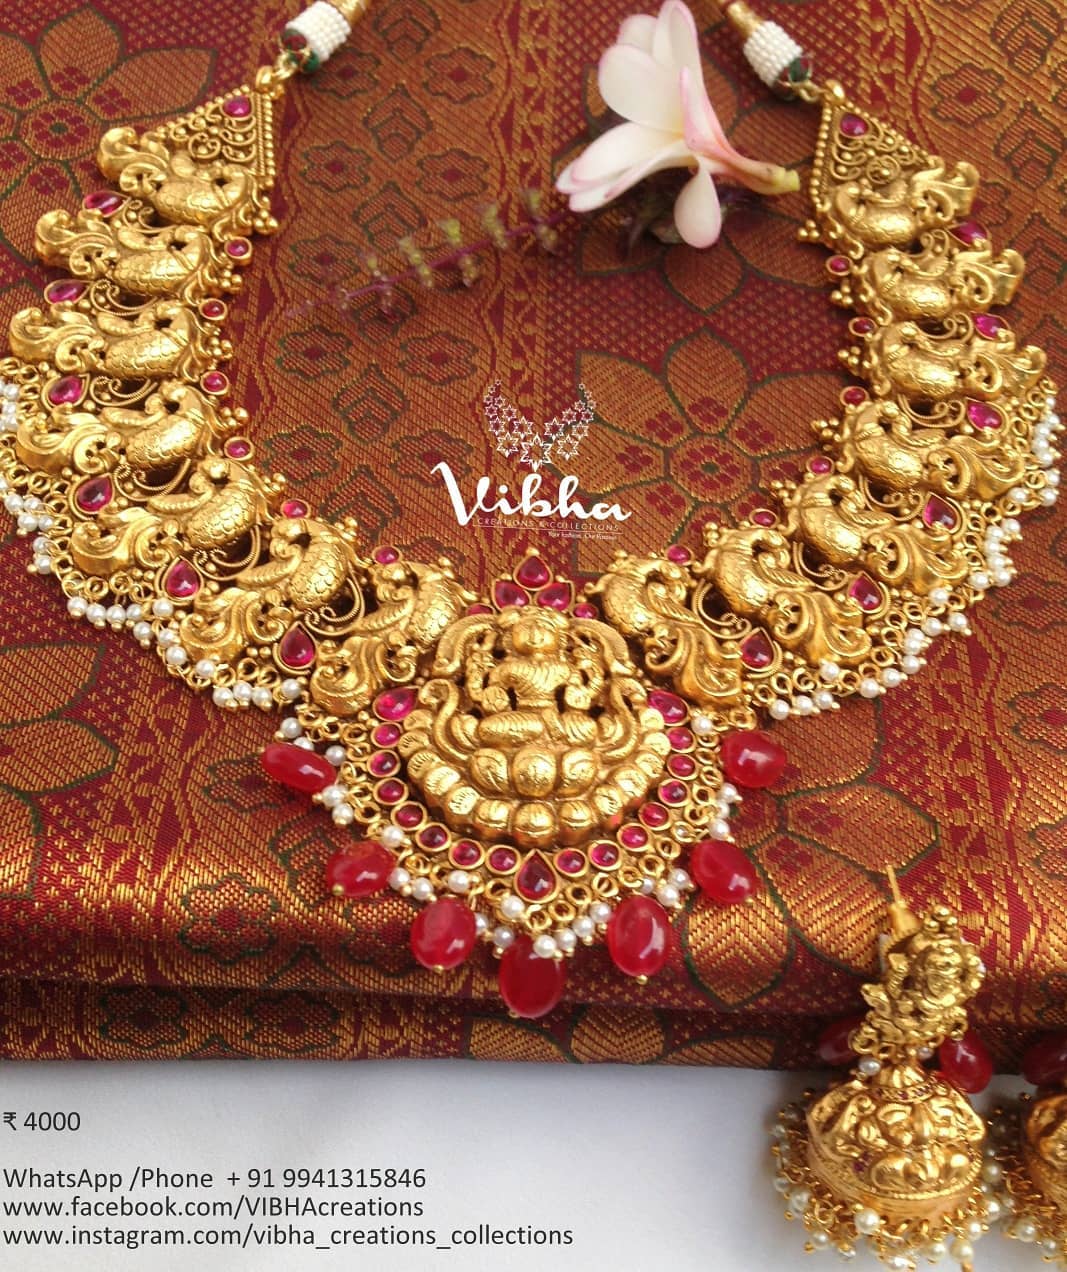 Grand Temple Necklace From Vibha Creations